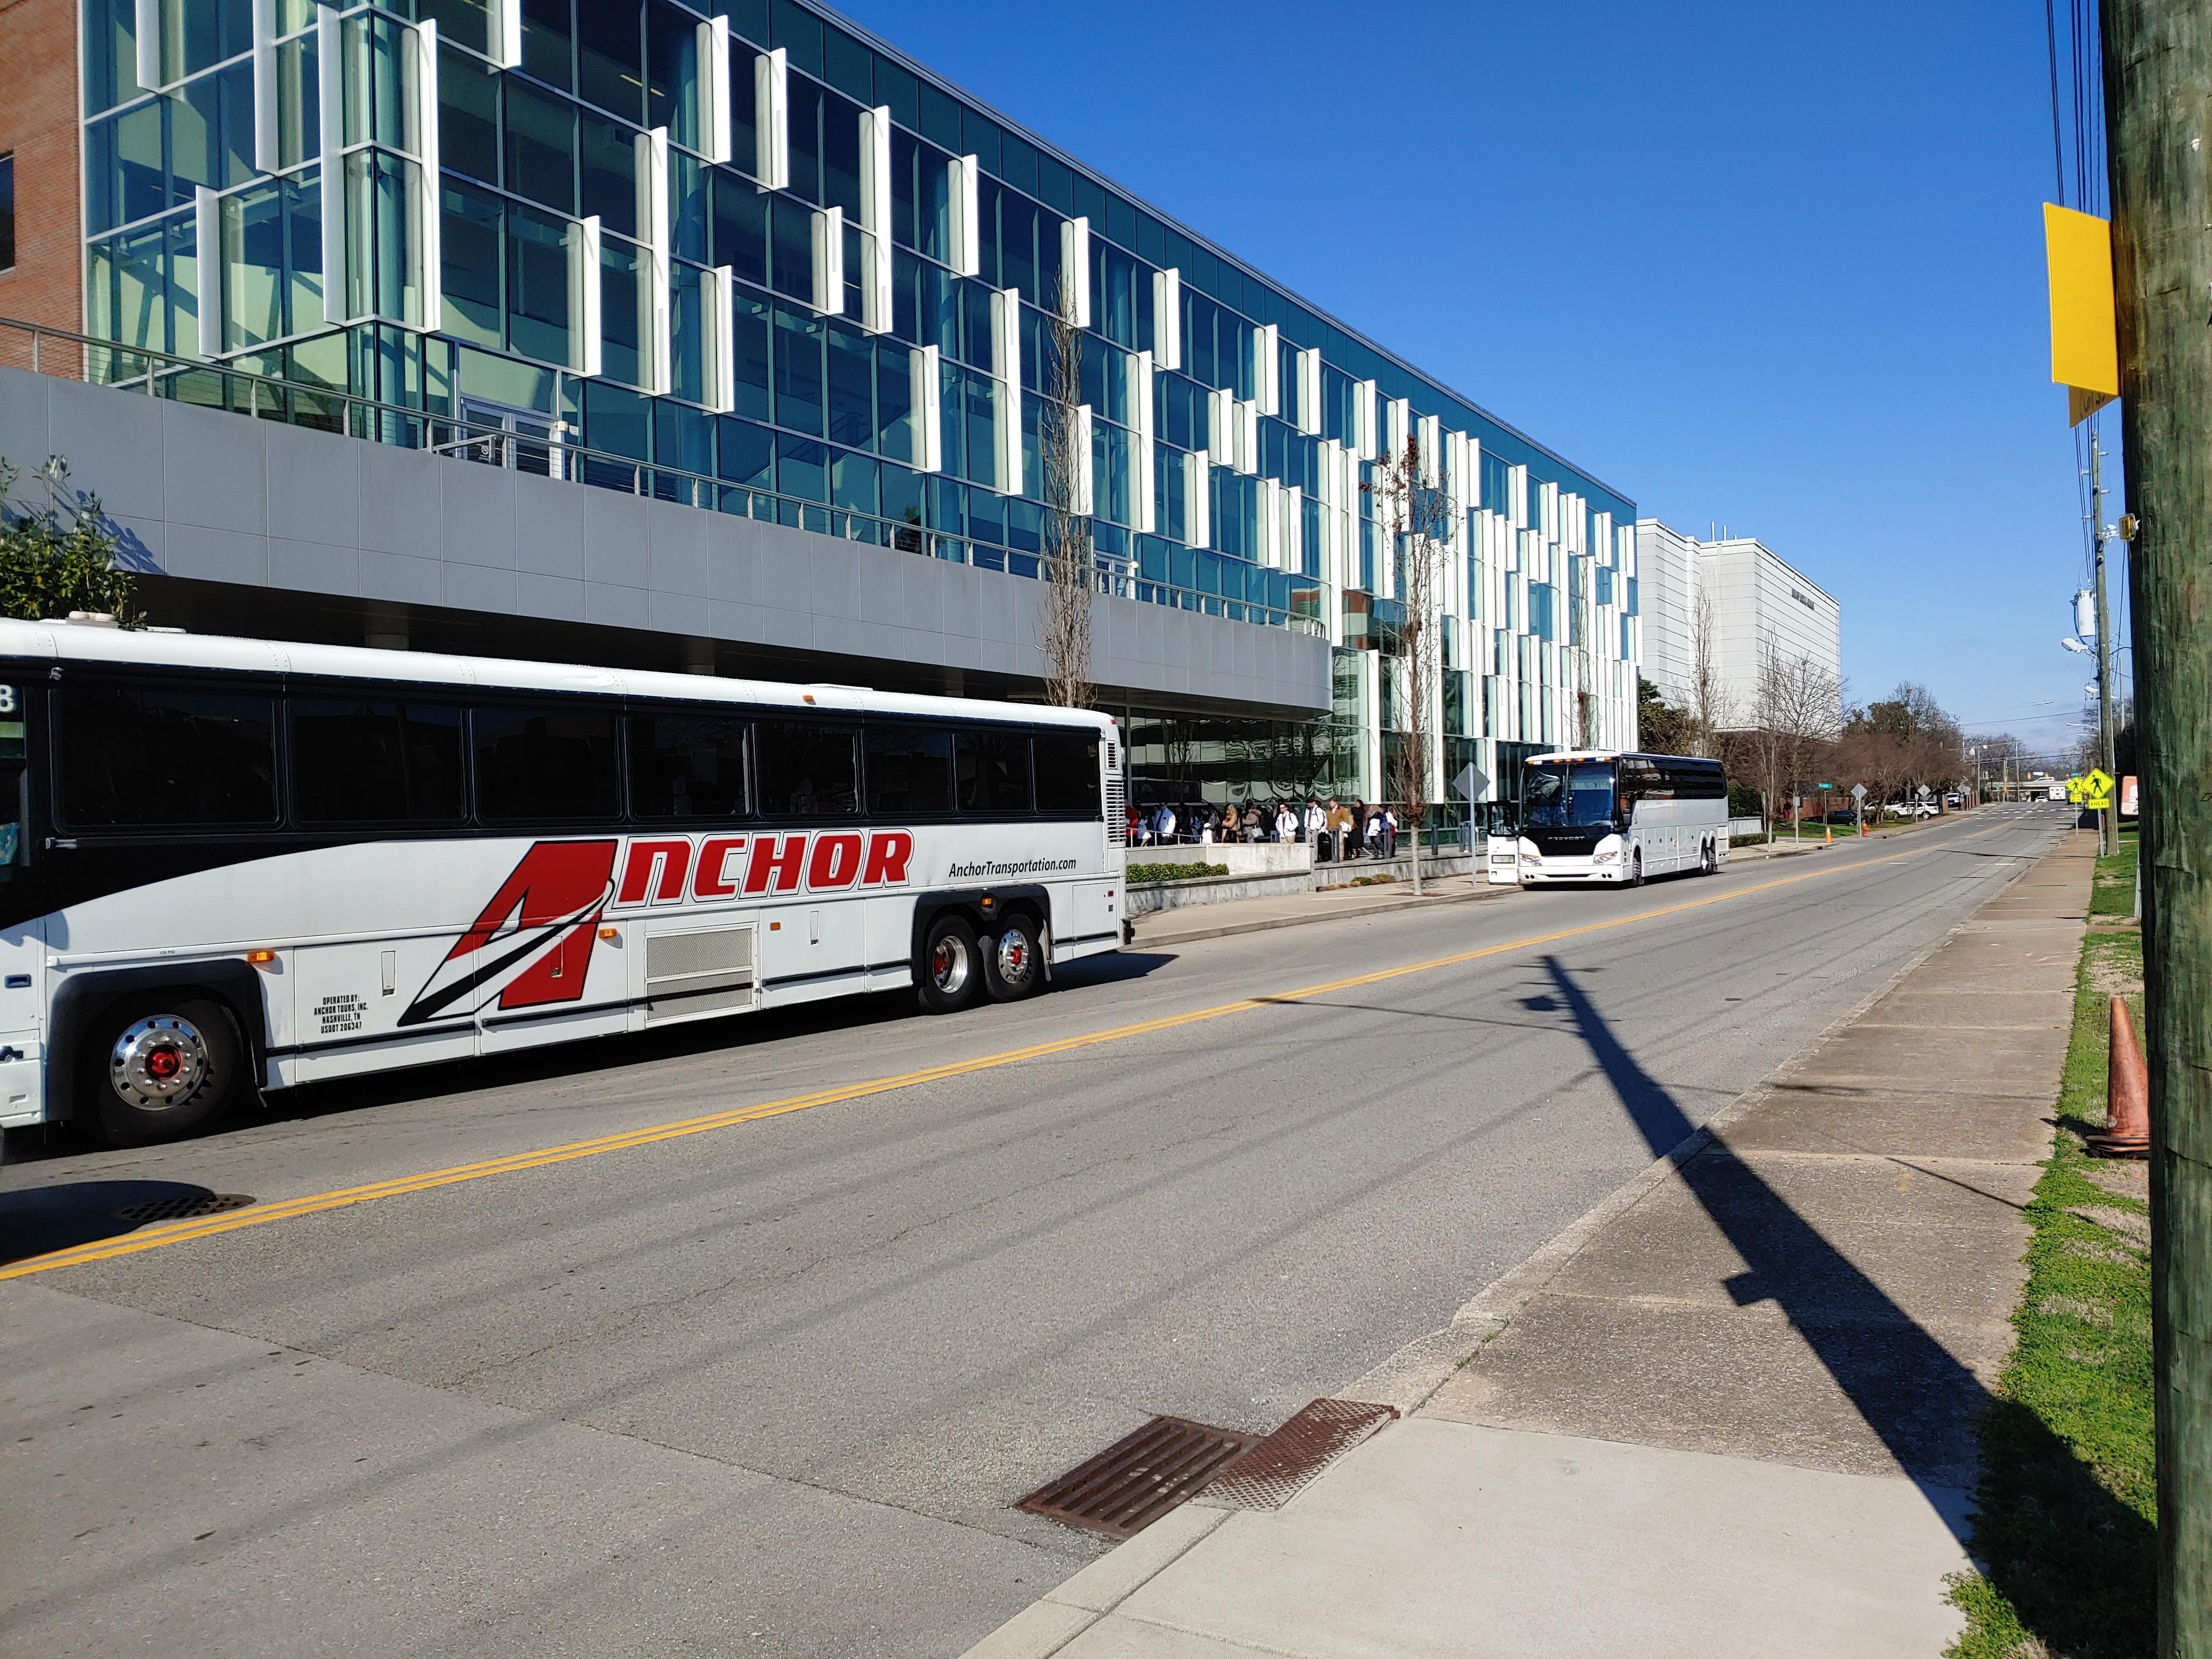 Buses of students arrive at Meharry's Cal Turner Center